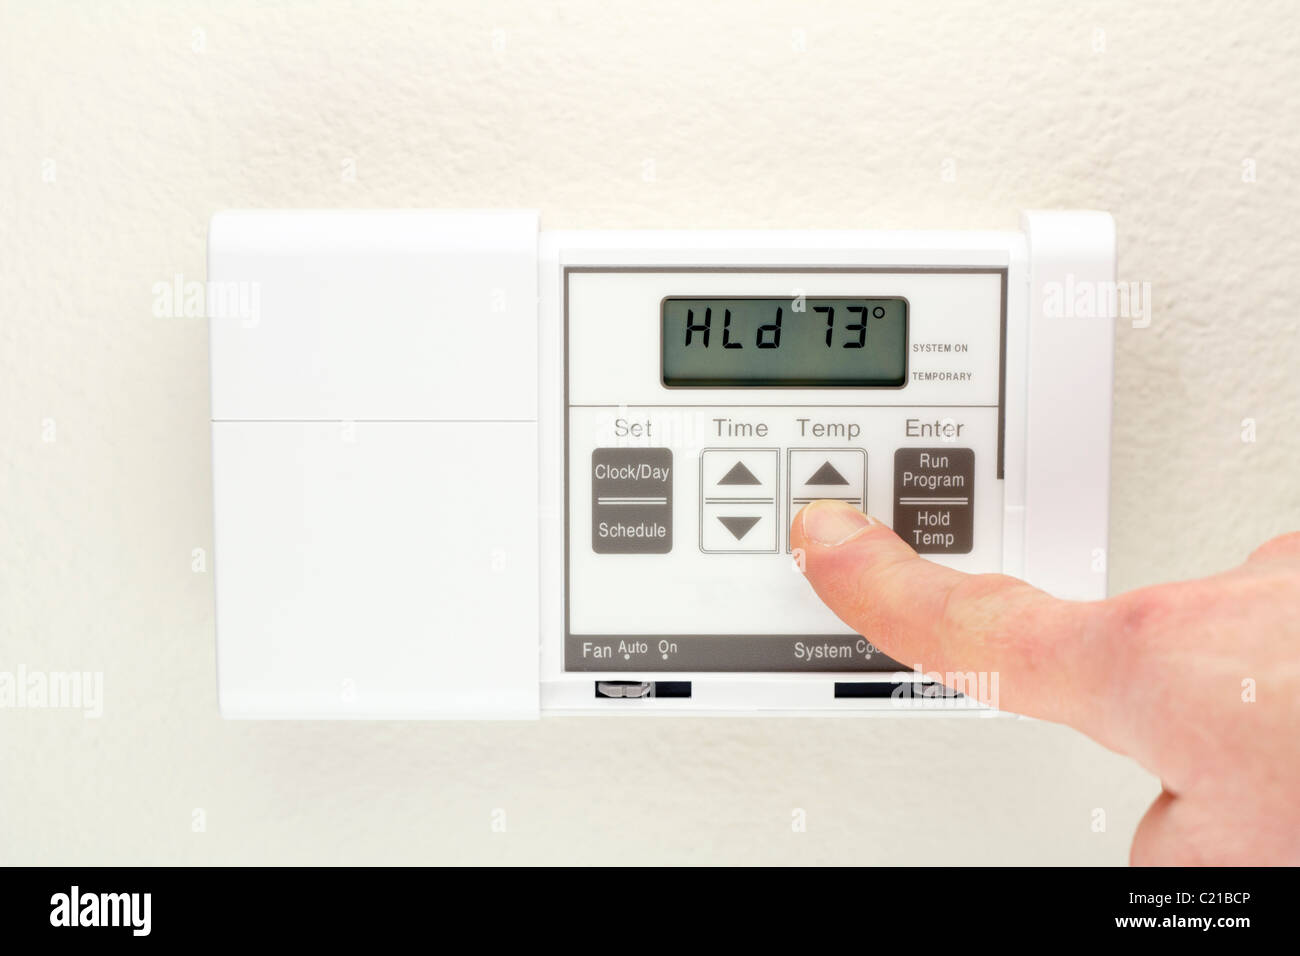 HVAC home thermostat of an energy efficient heating and cooling air conditioning system. Change control of heating cooling digital wall panel display. Stock Photo